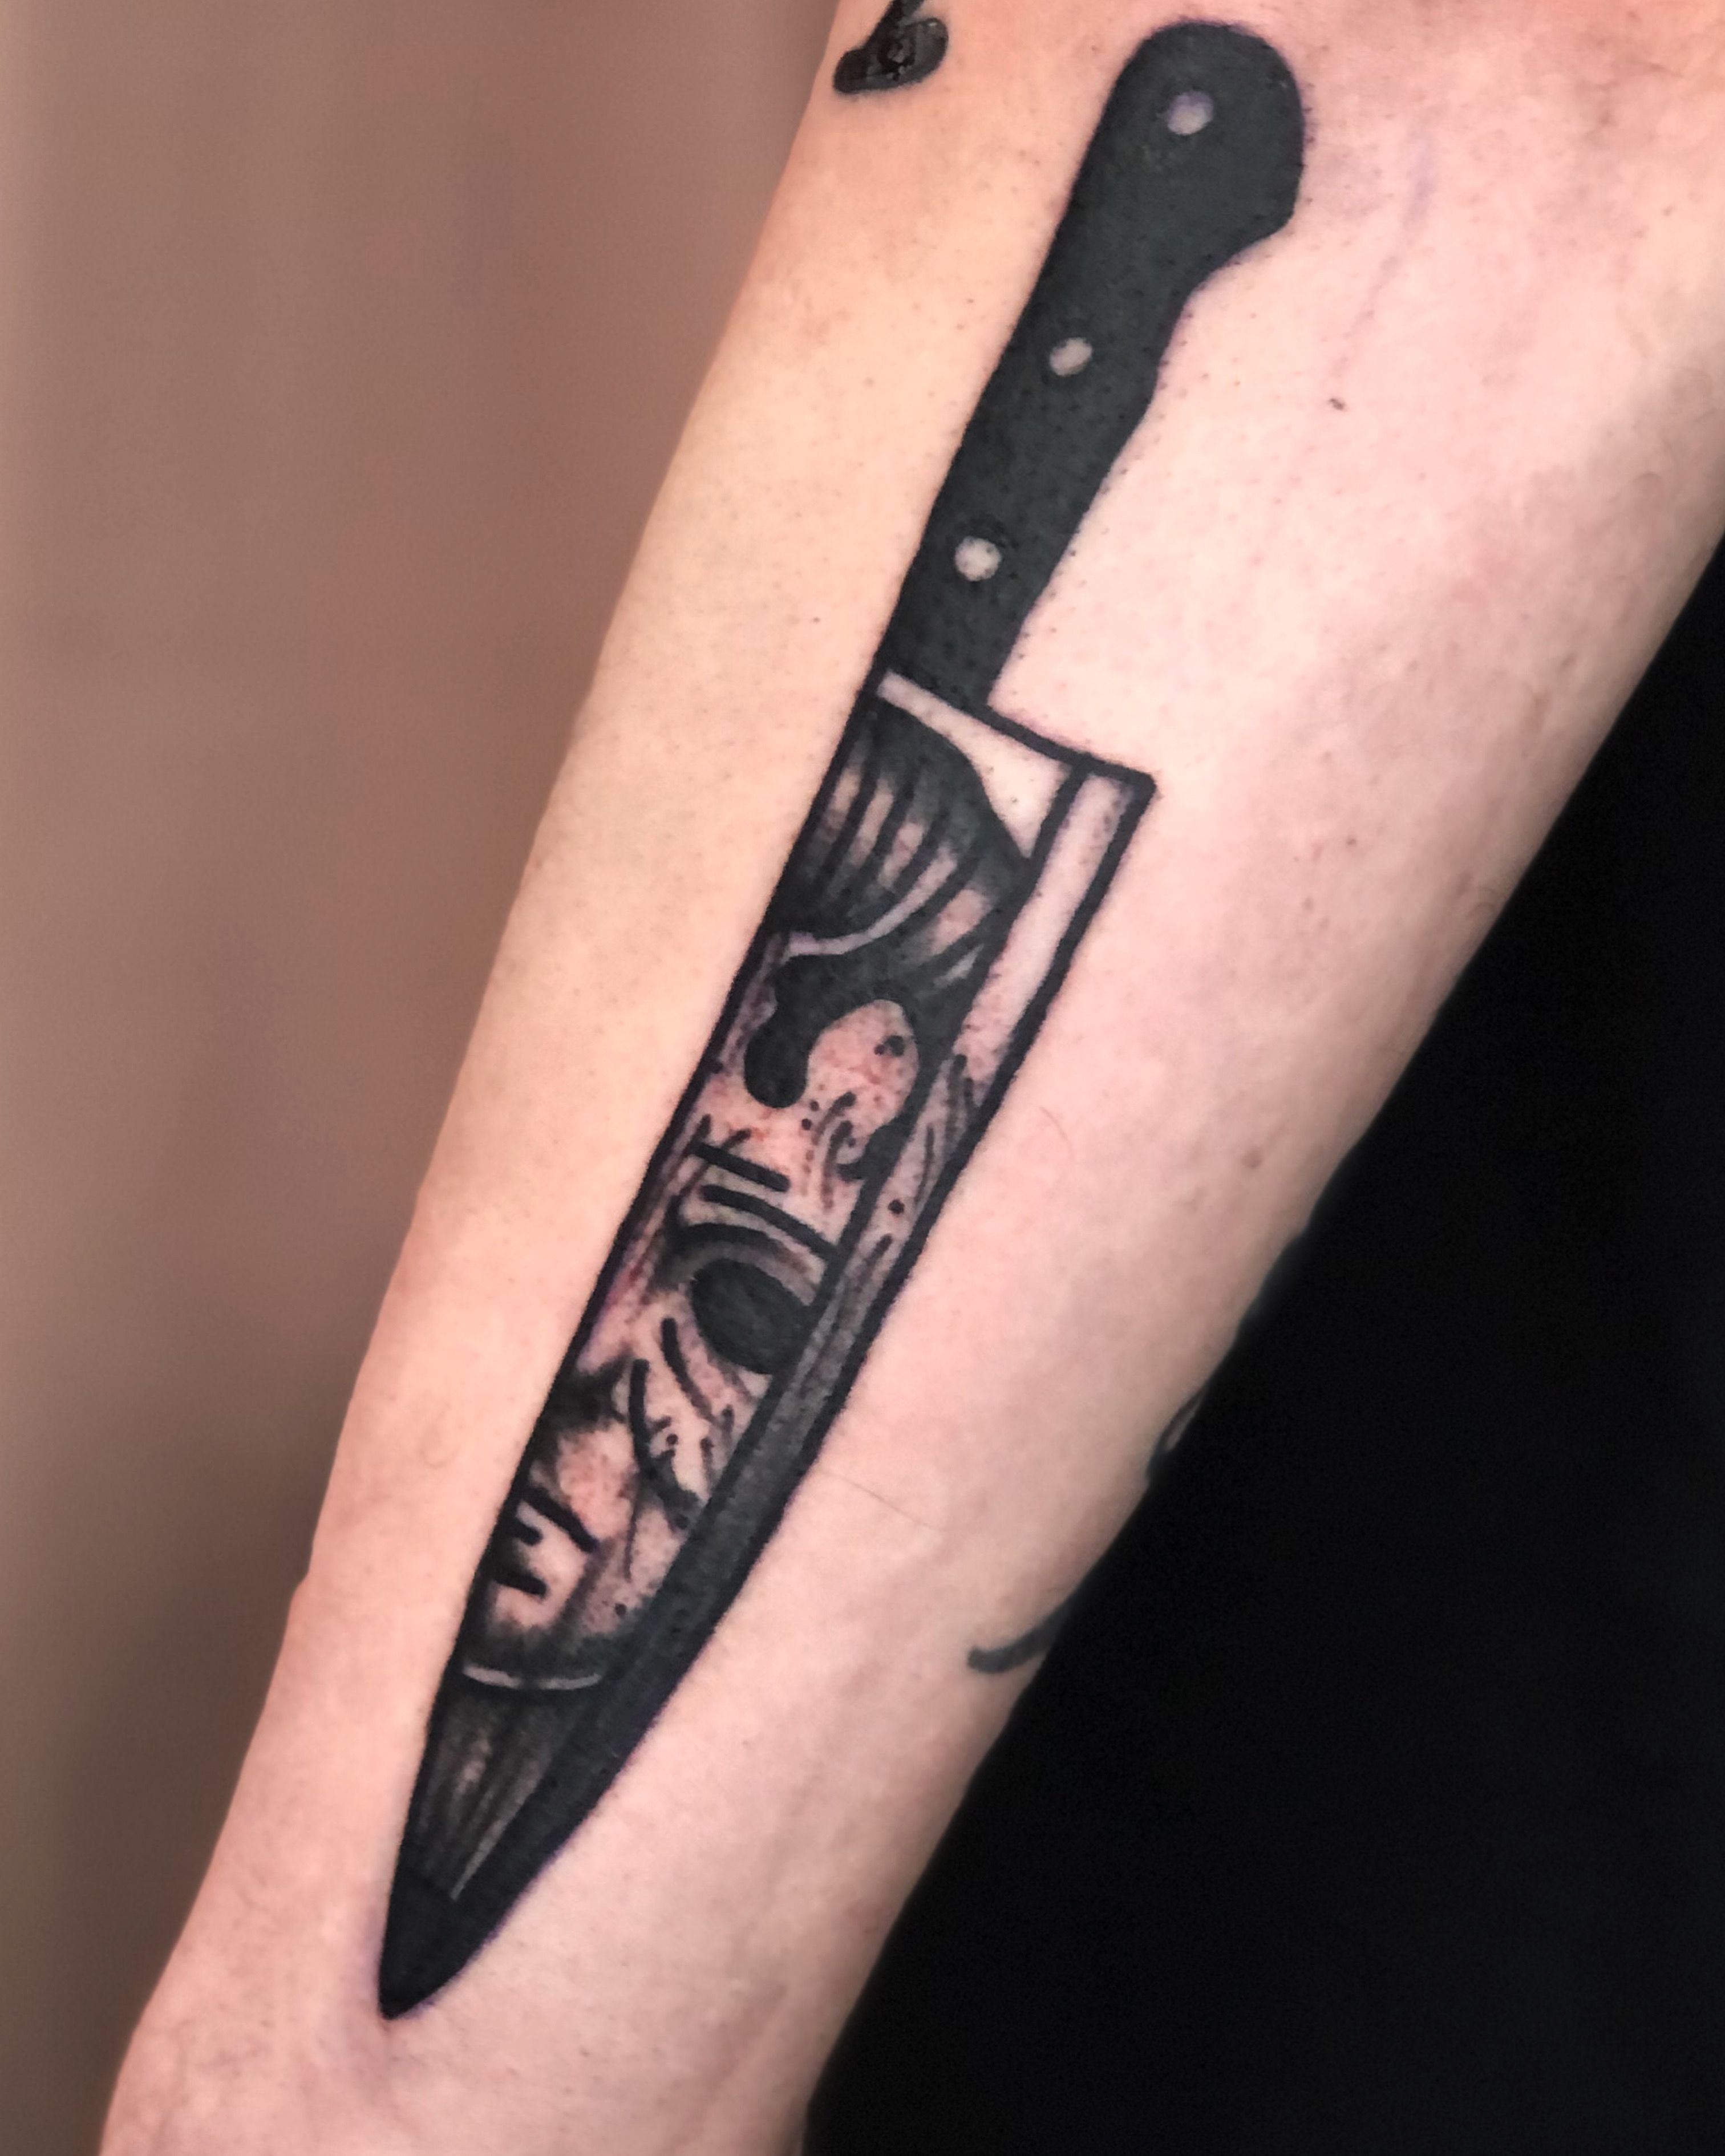 North Star Tattoo  By Tom brydon Michael Myers knife for Alex today  contact for booking and quotes thomasbrydonmecom startofsleeve  amazingtattoo northstartattoo northstartattoostudio tattooistharrogate  harrogate harrogatenorthyorkshire 